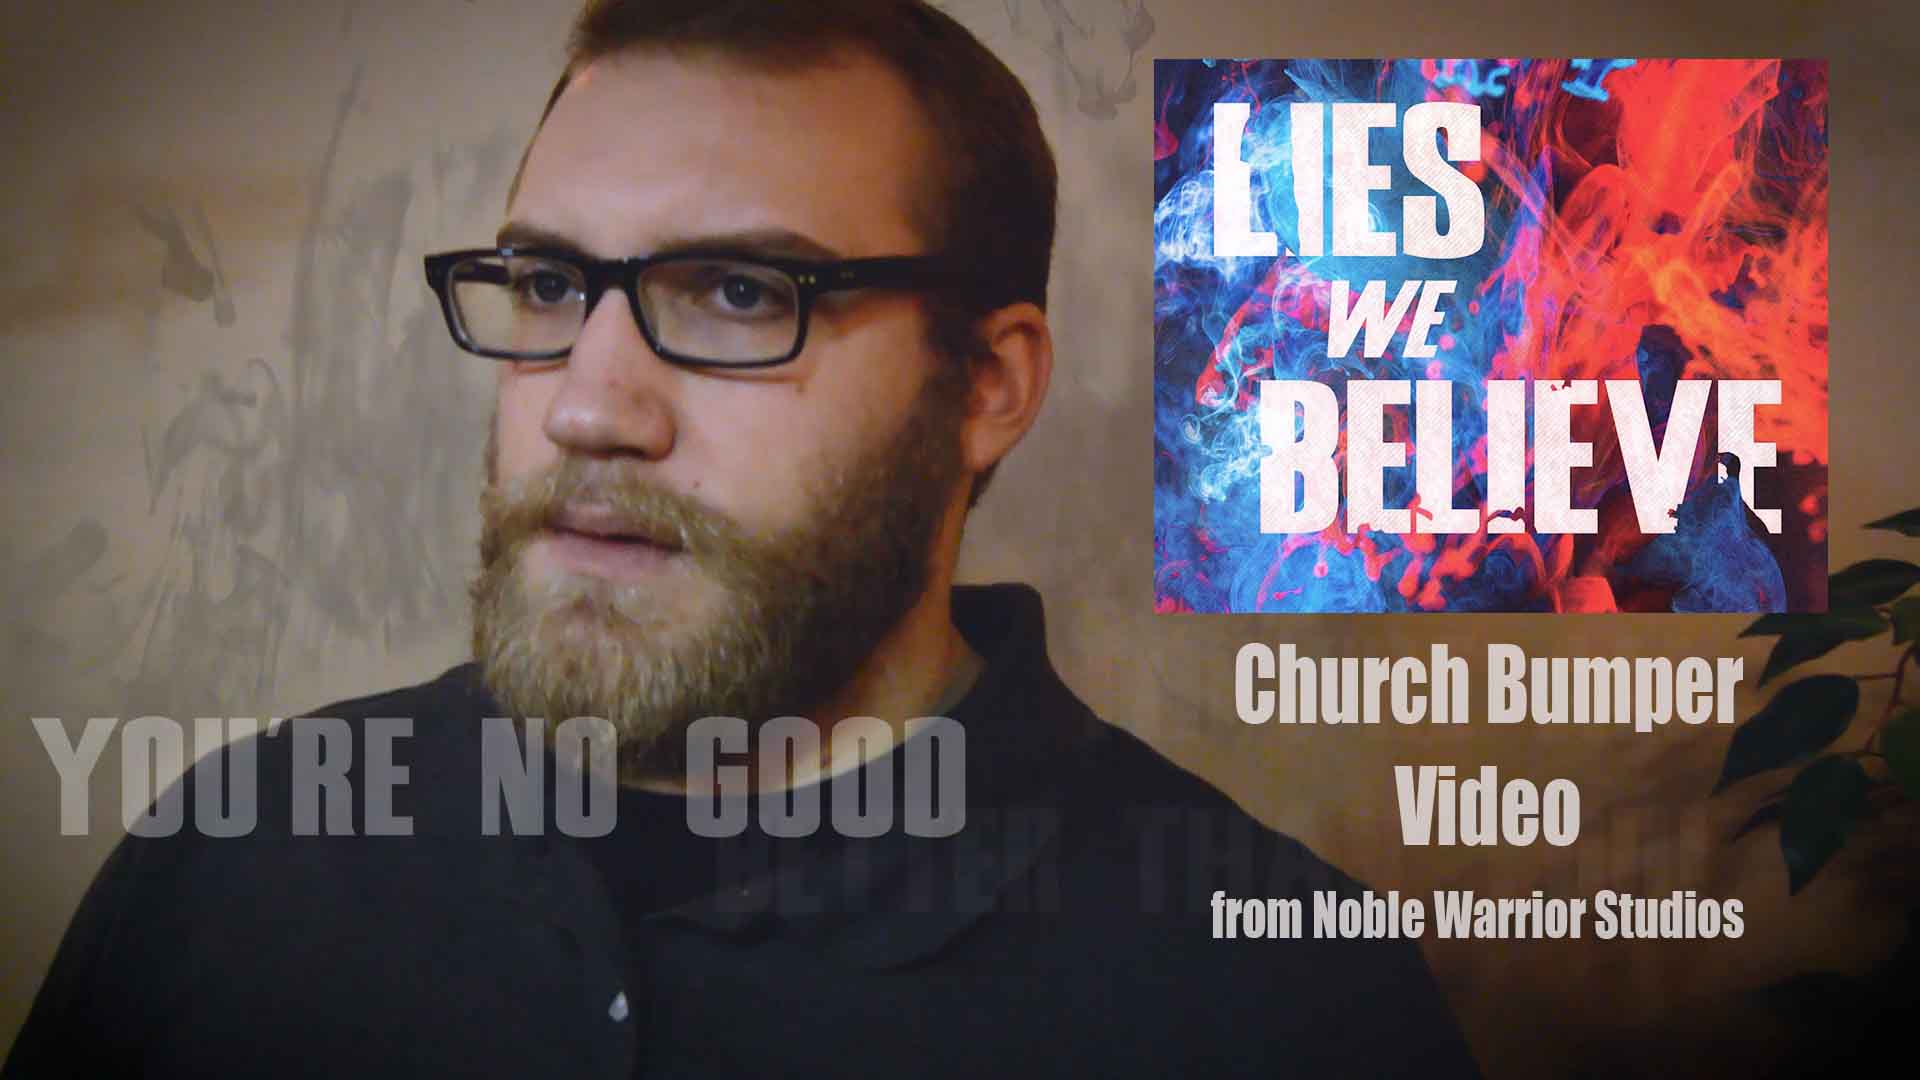 Lies We Believe bumper video NWS created for church. Click to play on YouTube.